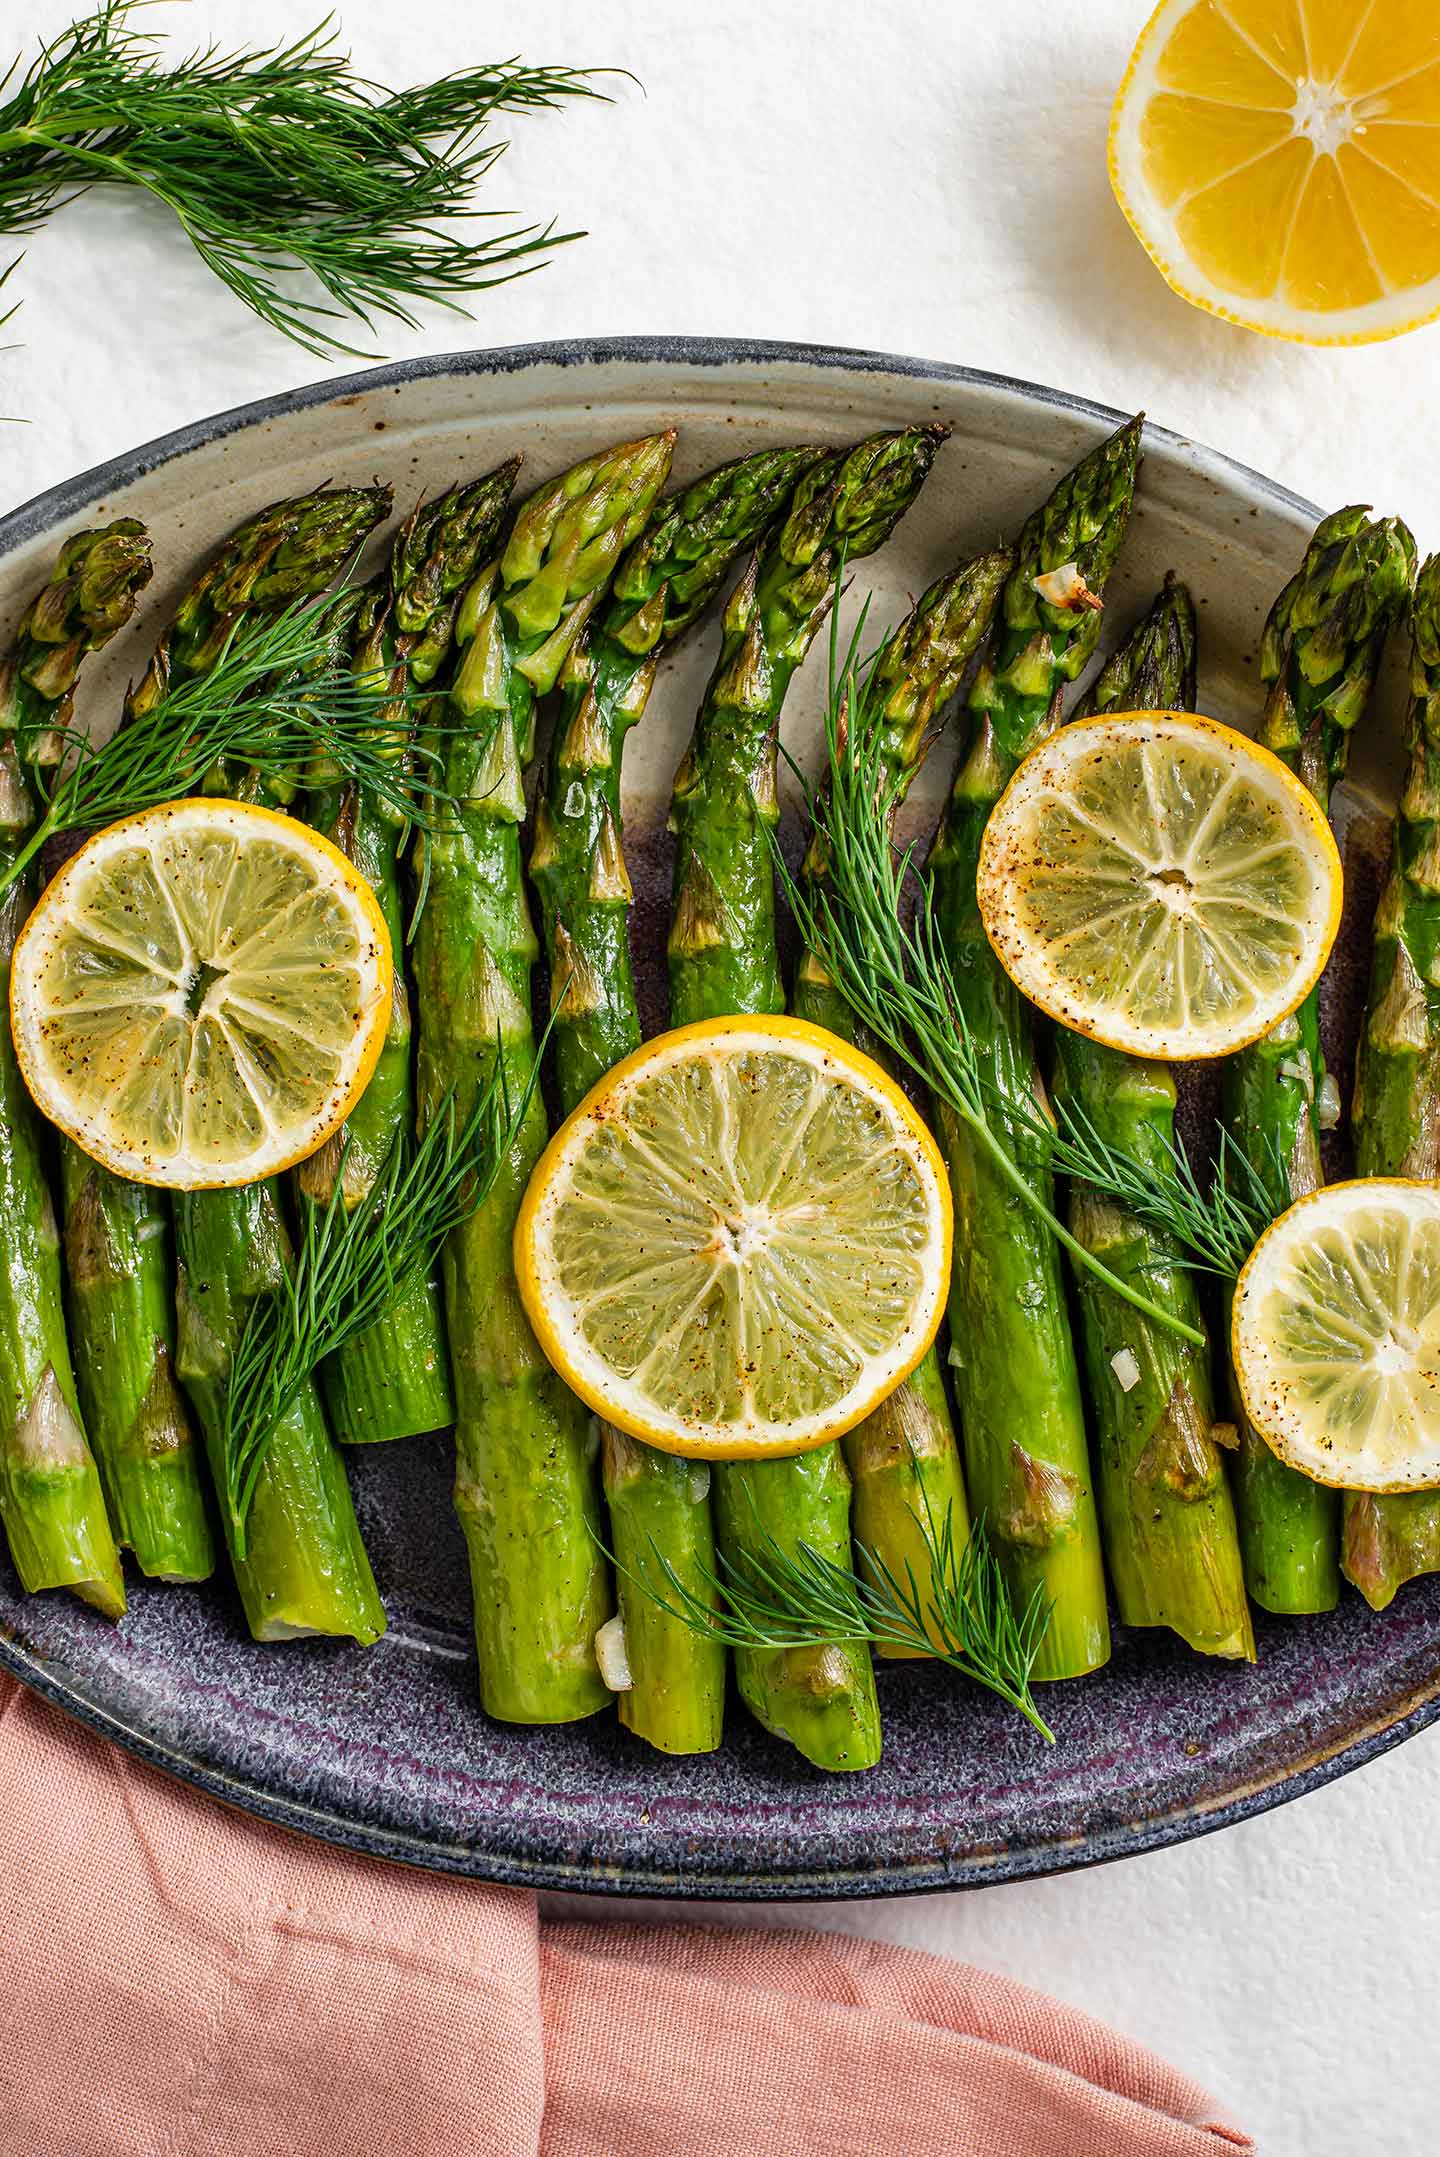 Top down view of lemon roasted asparagus in a serving platter with roasted lemon slices and fresh dill to garnish